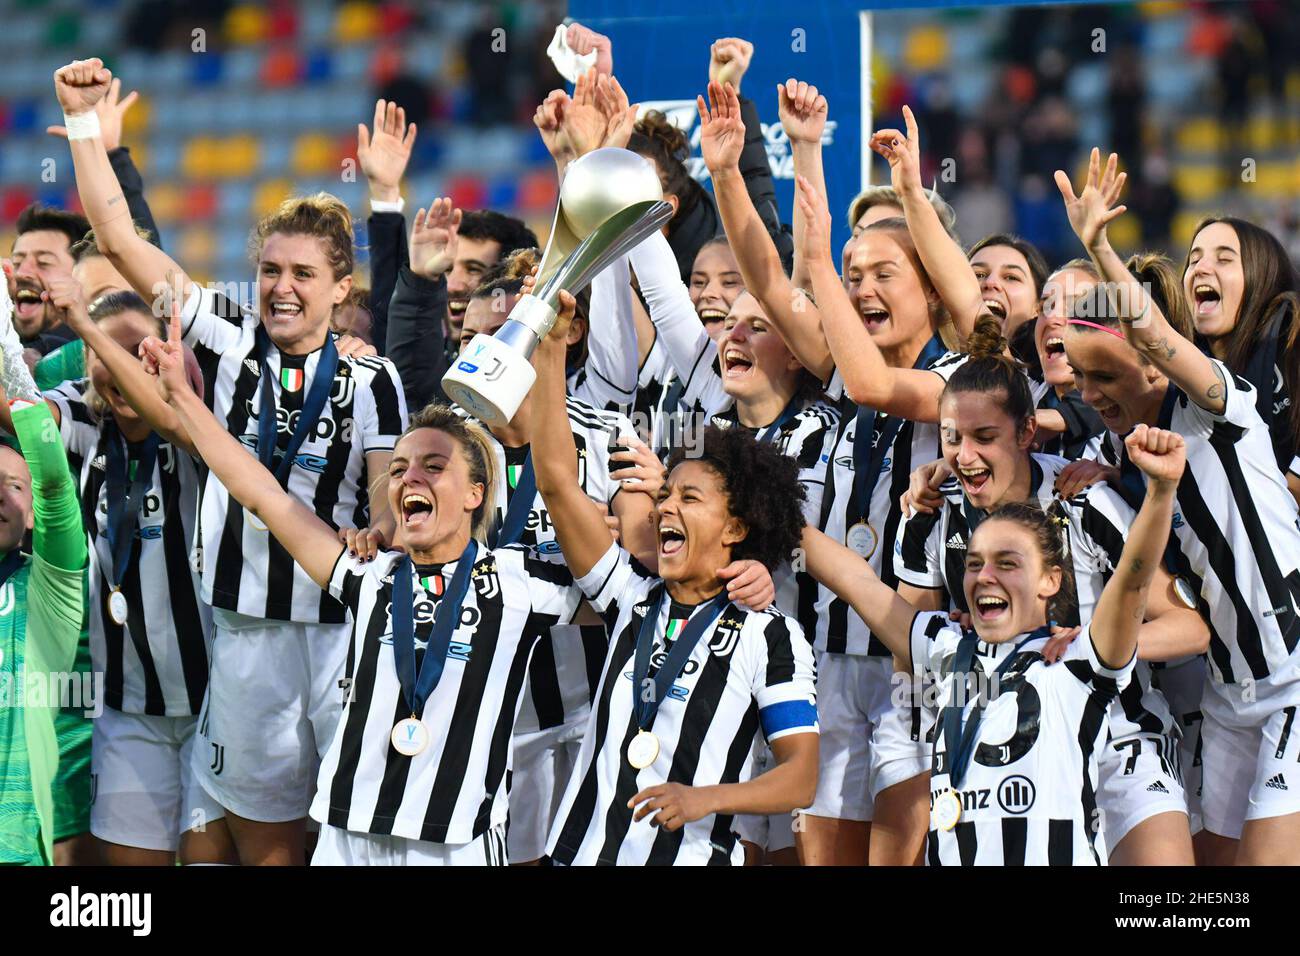 Frosinone, Italia. 08th Jan 2022. Exultation Juventus with Women's Italian Supercup Trophie (Photo by Andrea Amato/Pacific Press) Credit: Pacific Press Media Production Corp./Alamy Live News Foto Stock